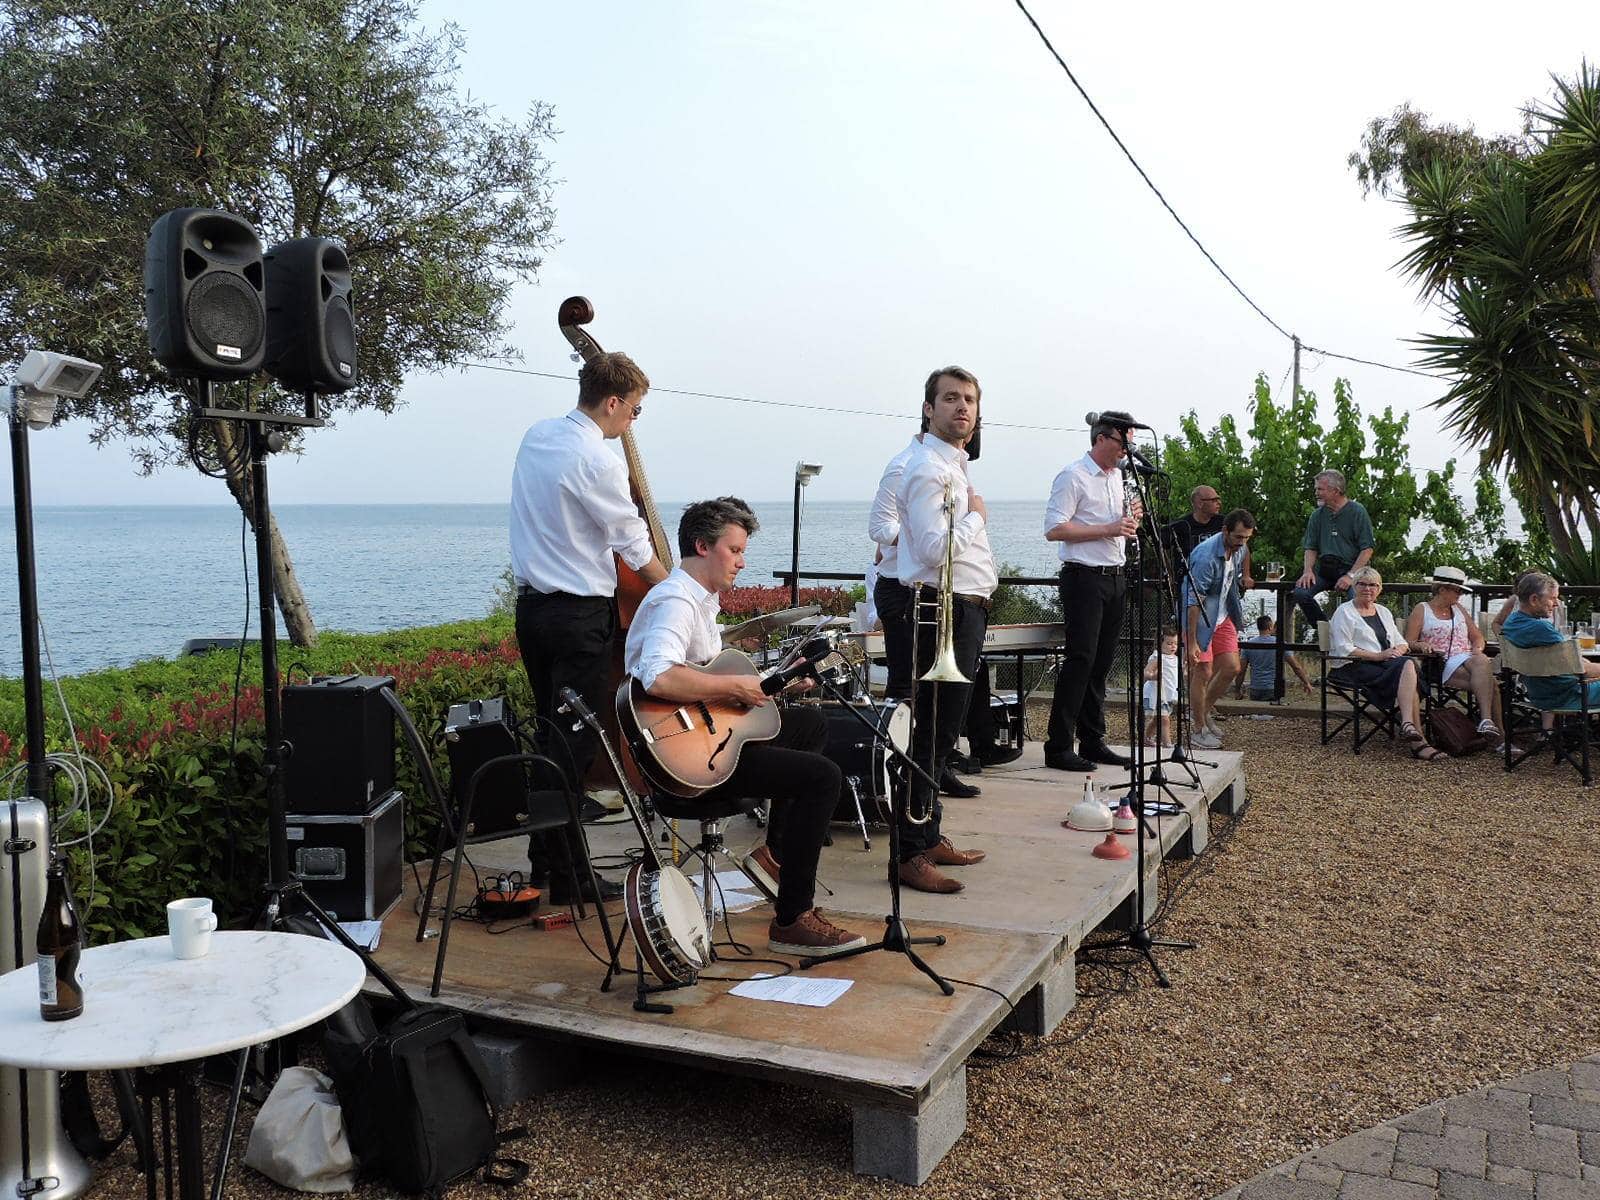 Jazz band plays music on stage overlooking the sea